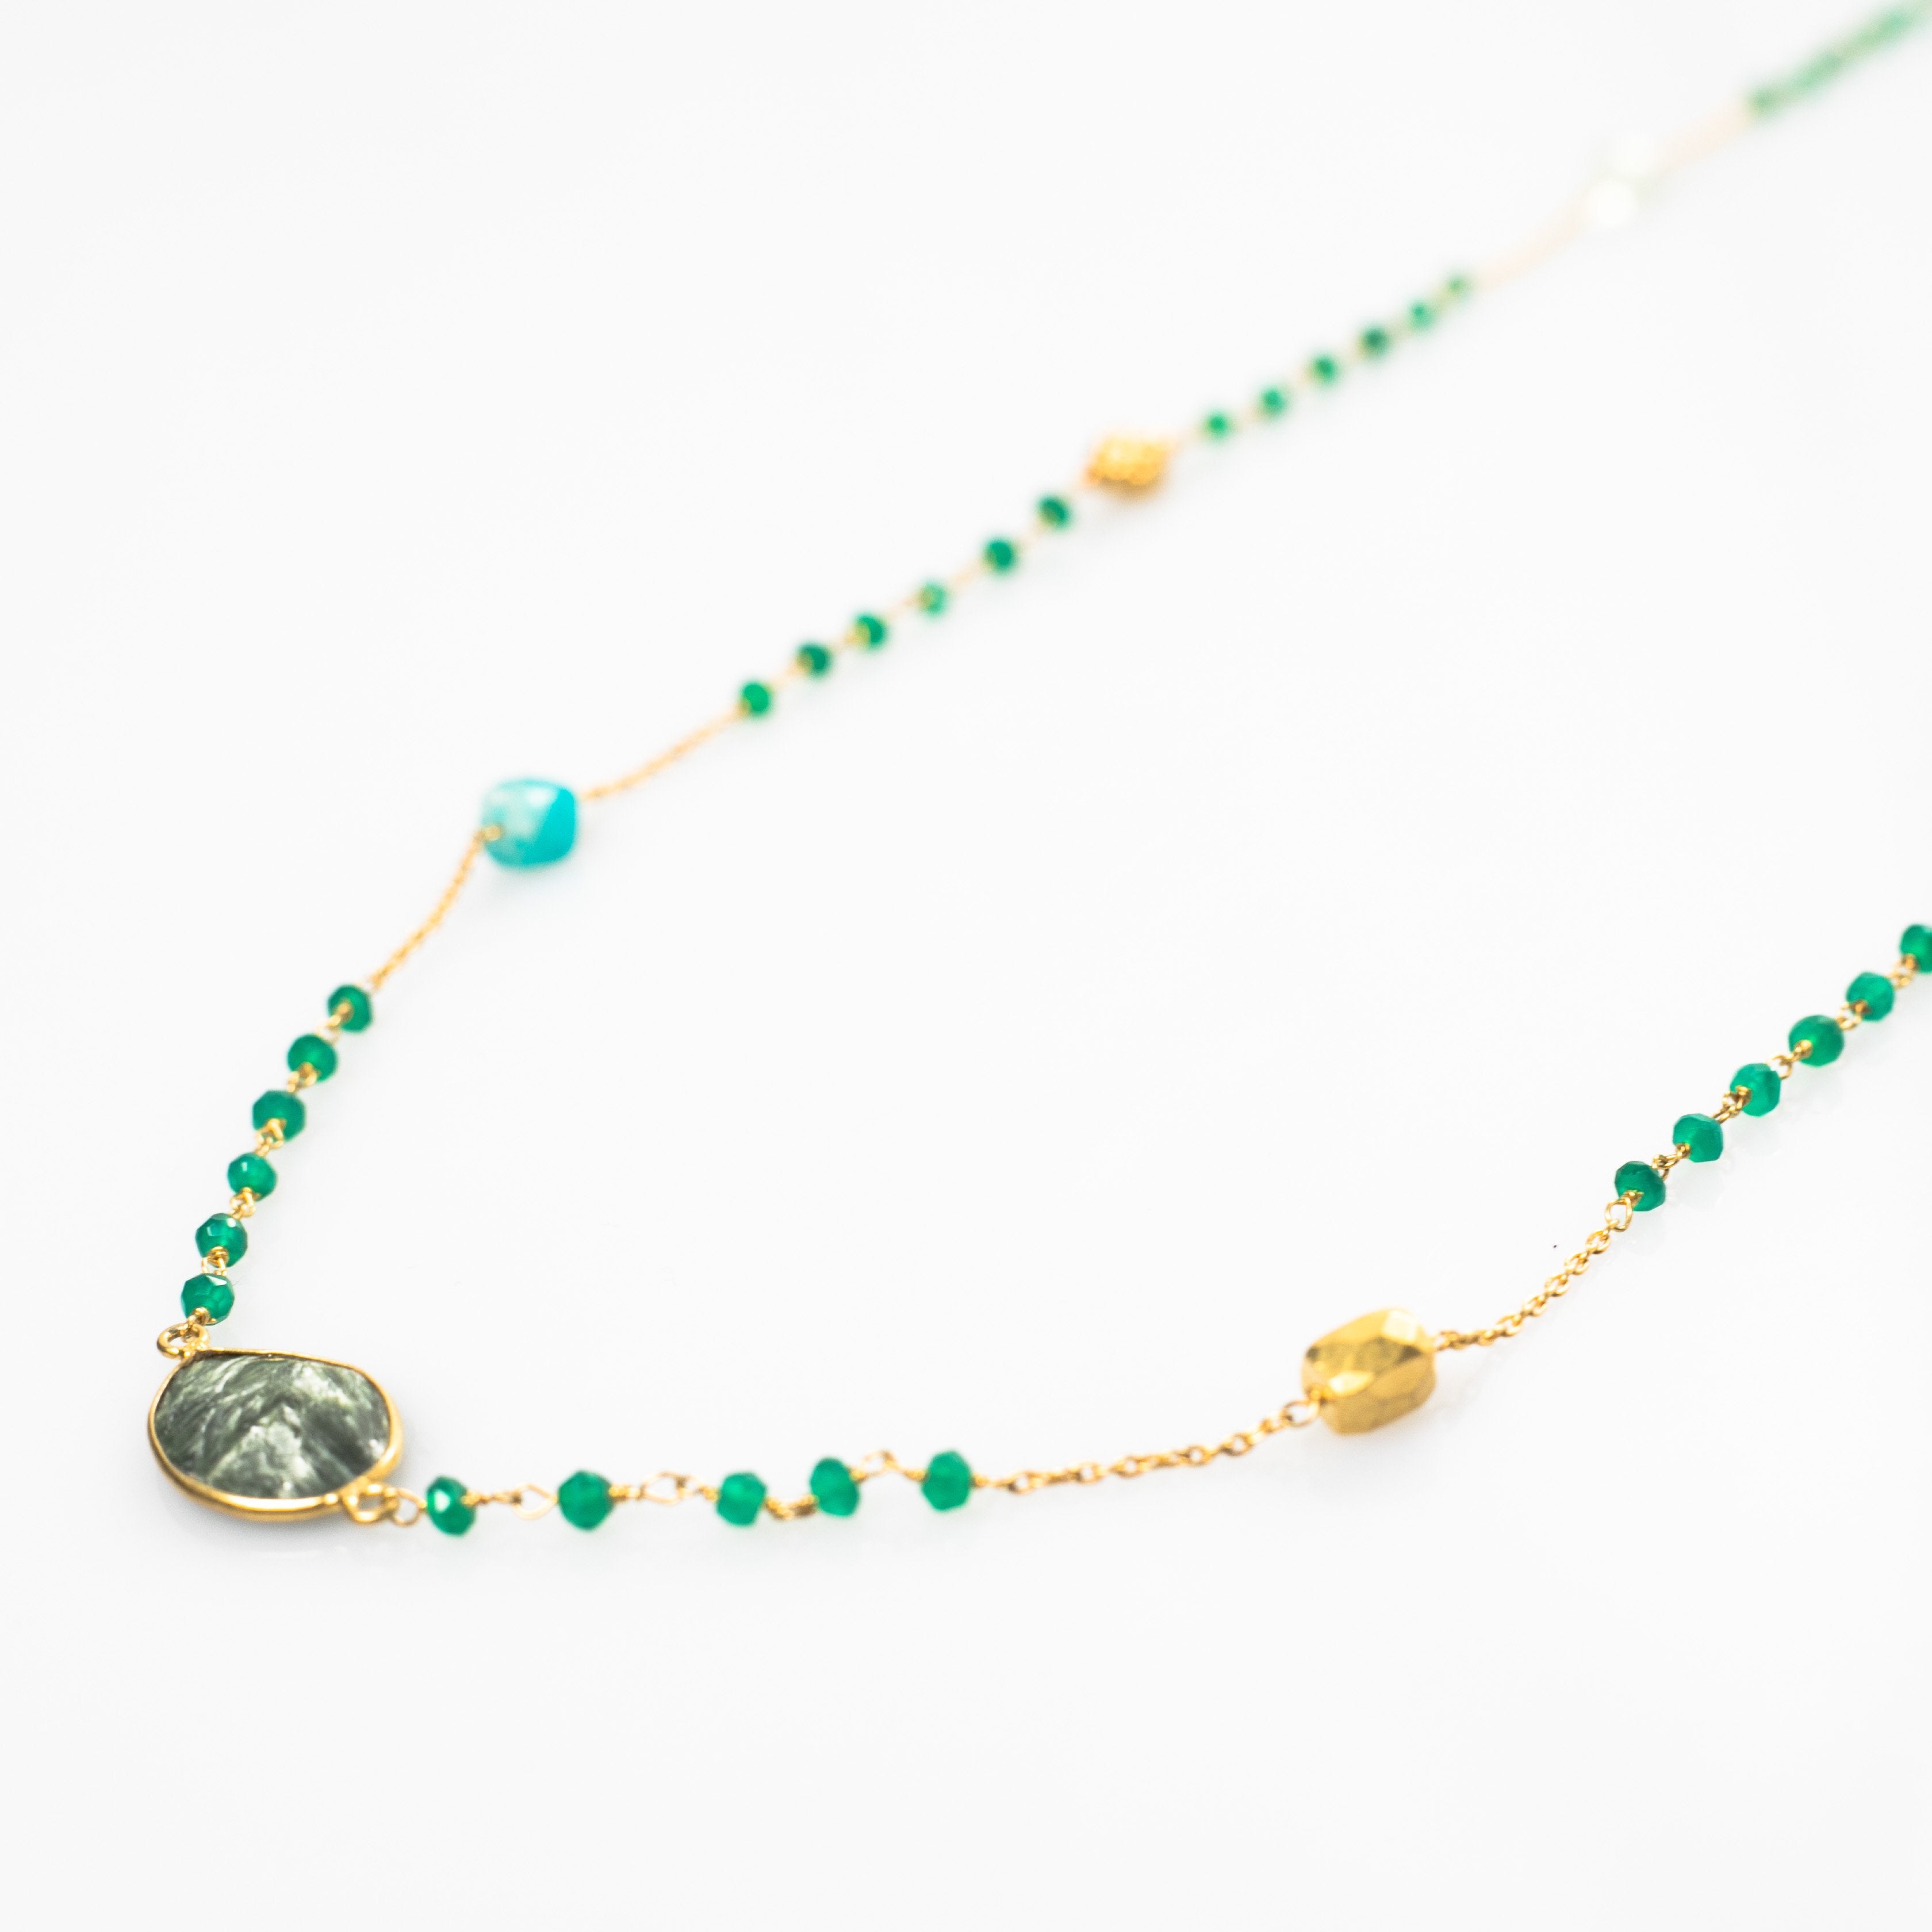 close up of Gold-Plated and Semi-precious Stone Metre-Long Necklace